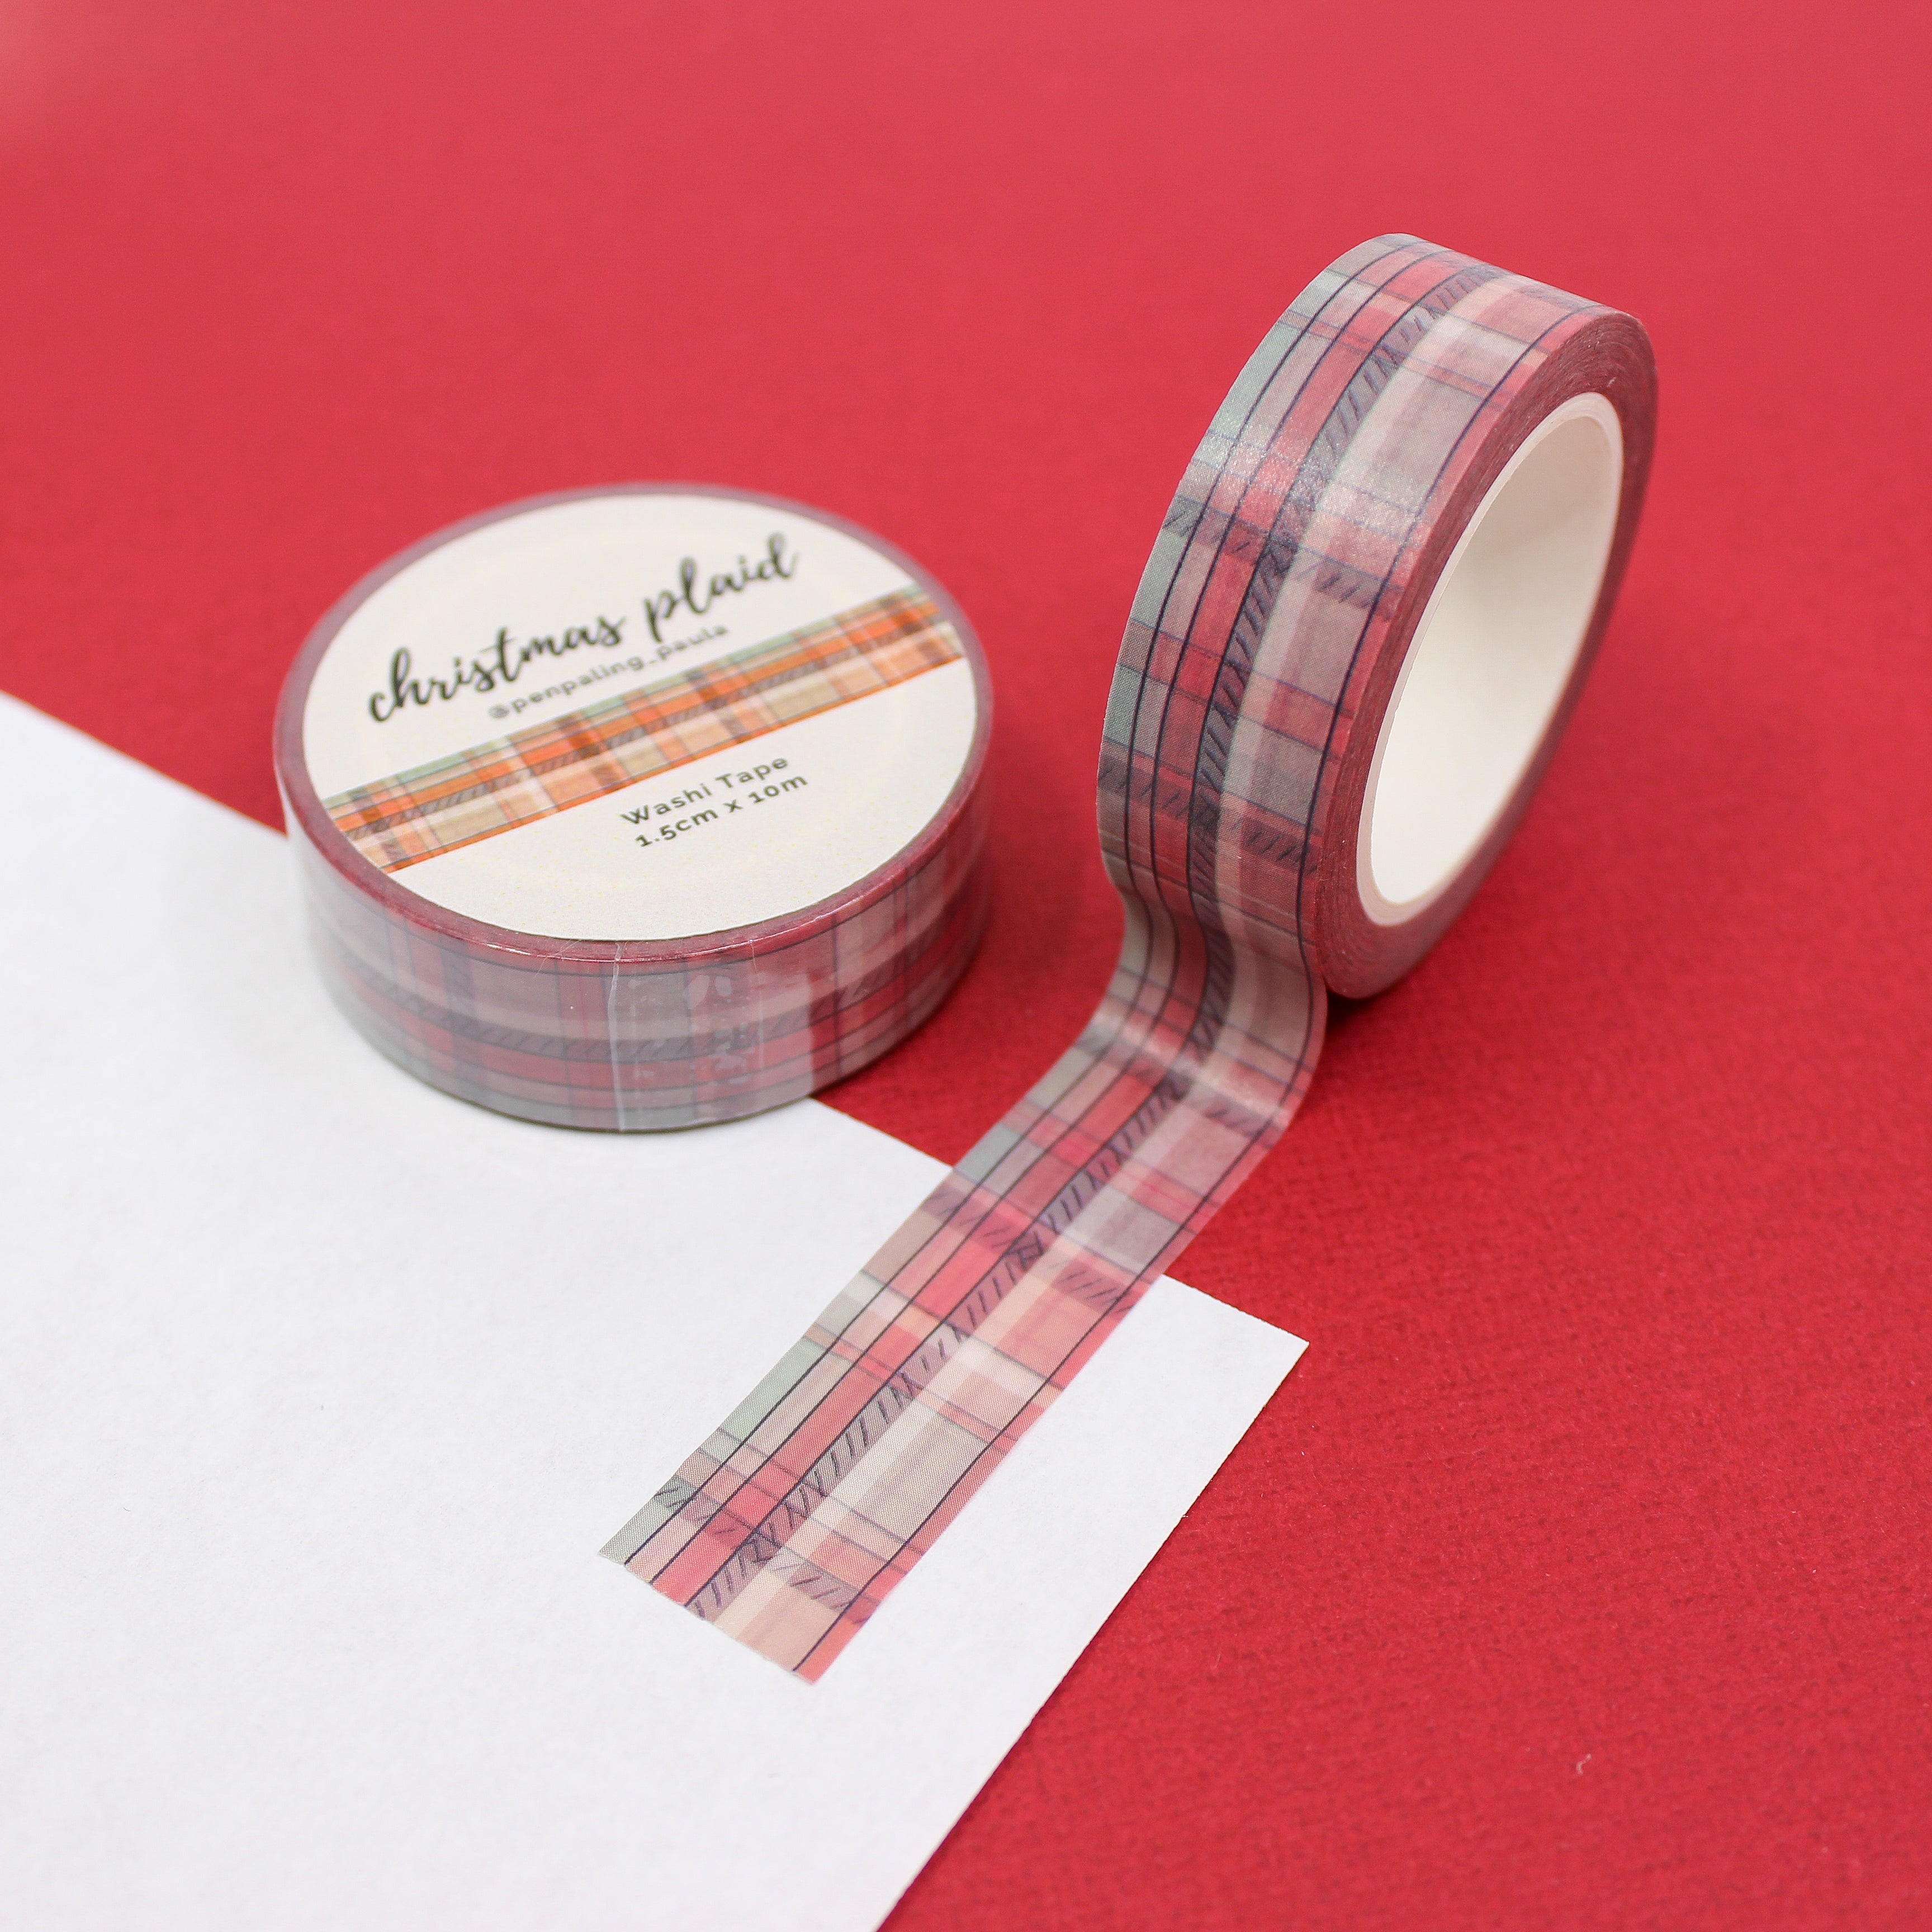 This is a cute red plaid washi tape from BBB Supplies Craft Shop